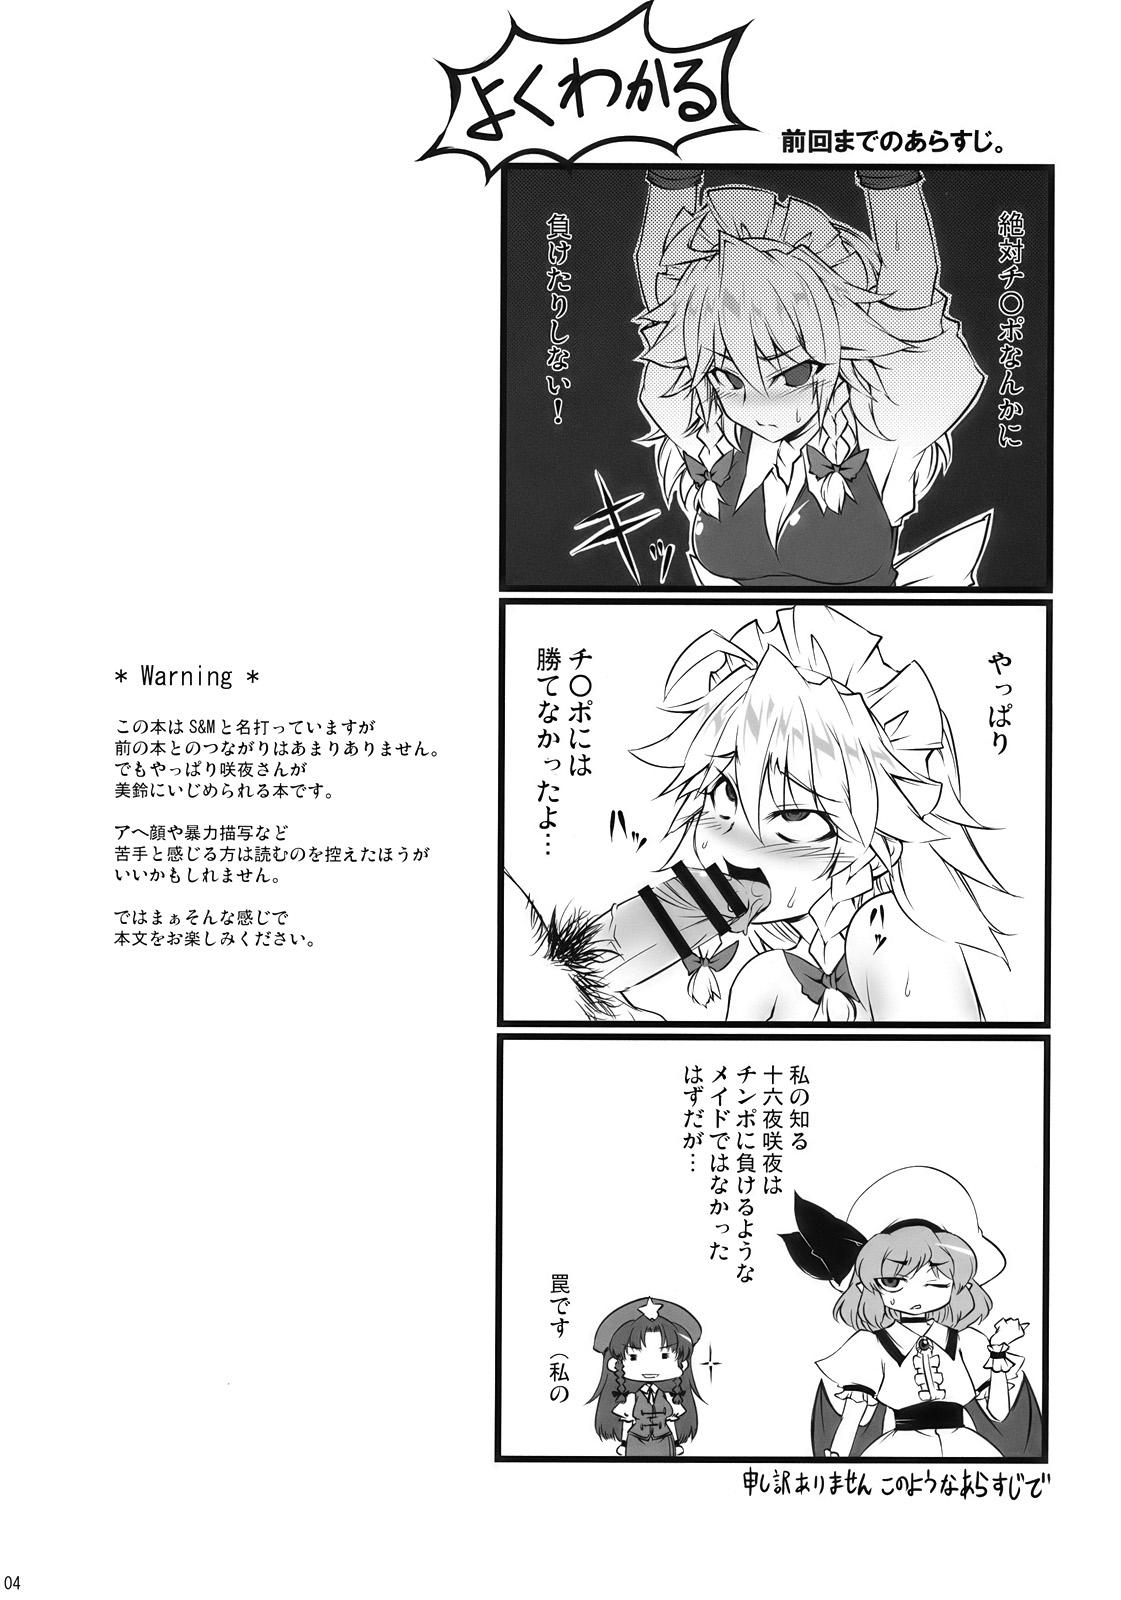 Hood S&M Violence - Touhou project Toys - Page 4